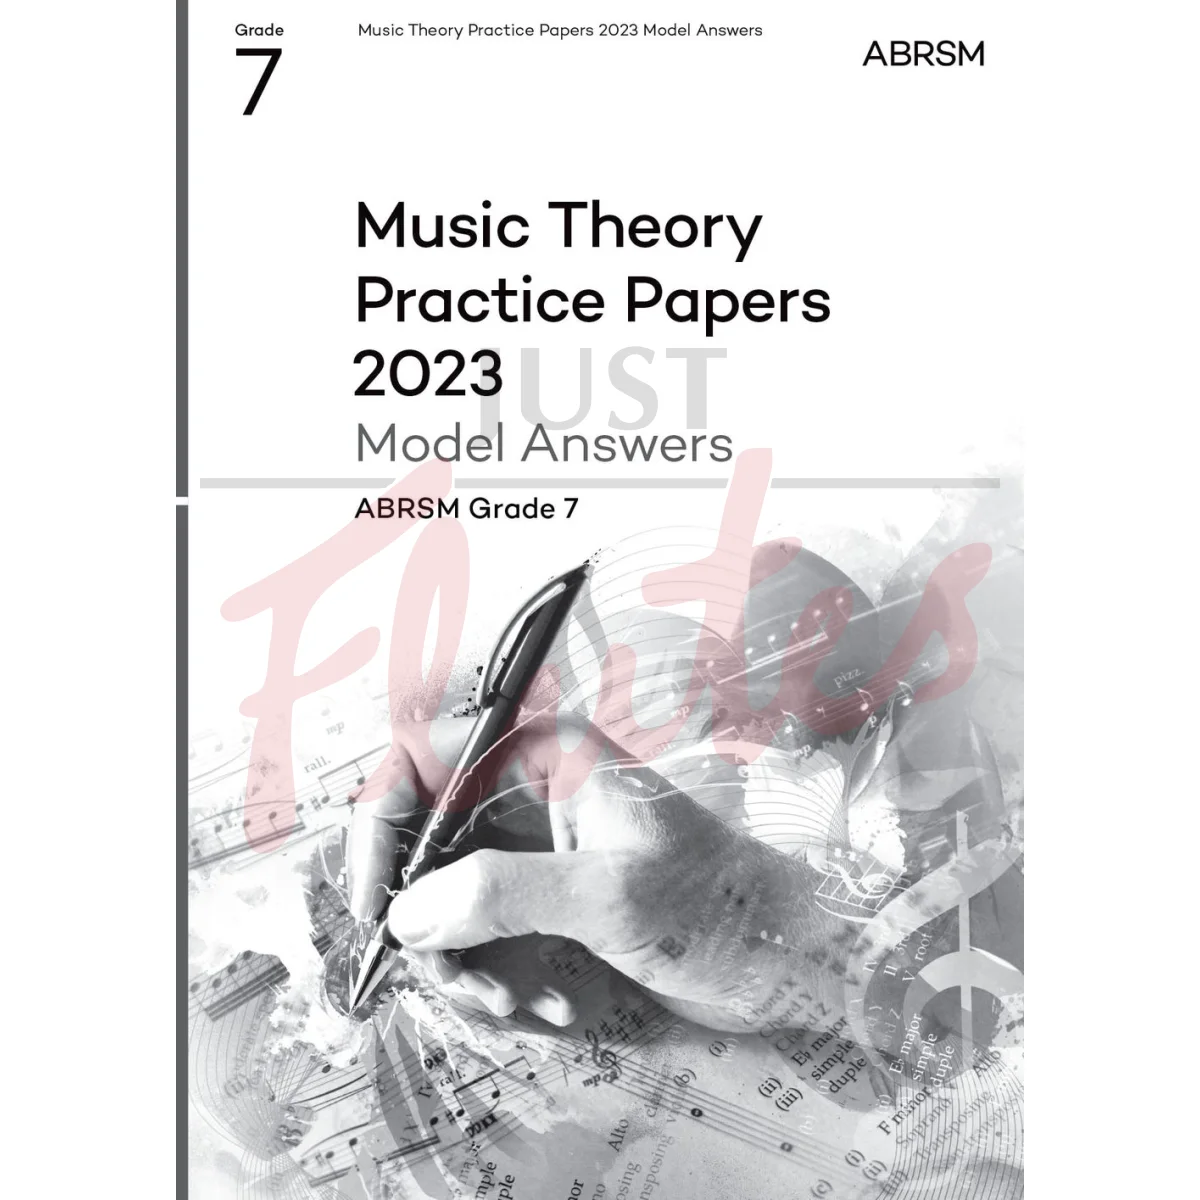 Music Theory Practice Papers 2023 Grade 7 - Model Answers